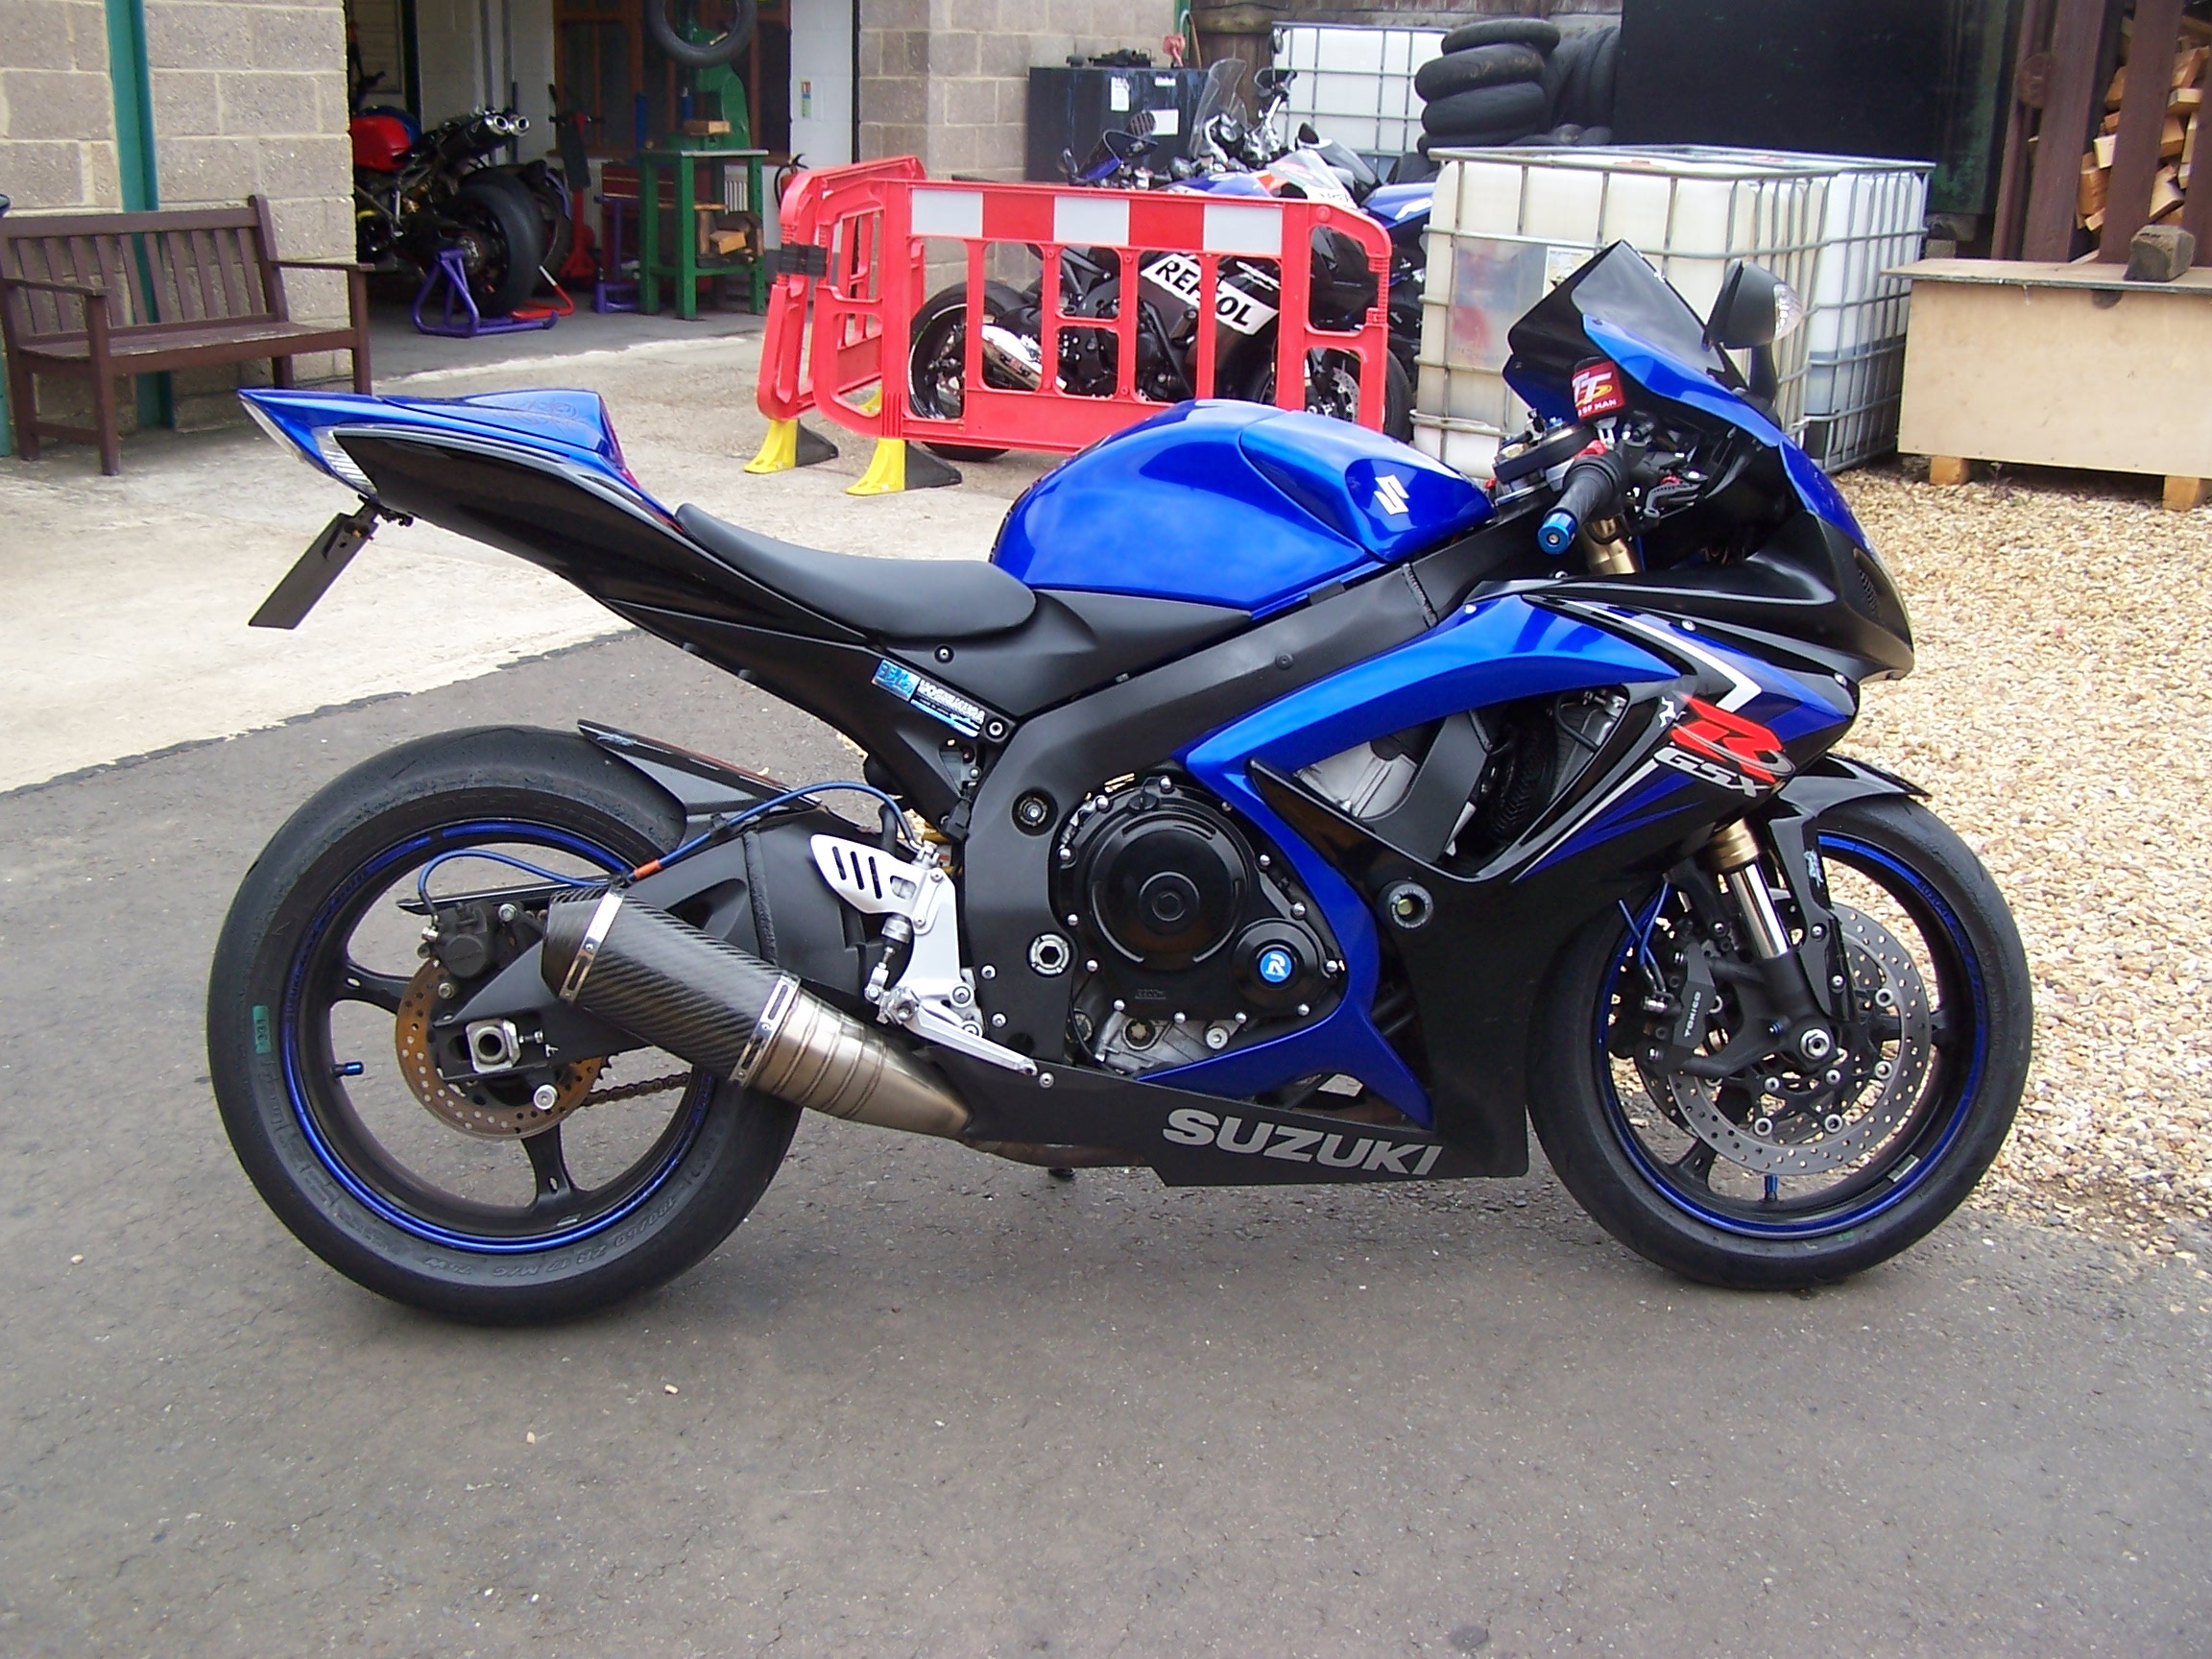 Suzuki GSX-R600K7 ECU remap – this one caused us a few problems and a little embarrassment!